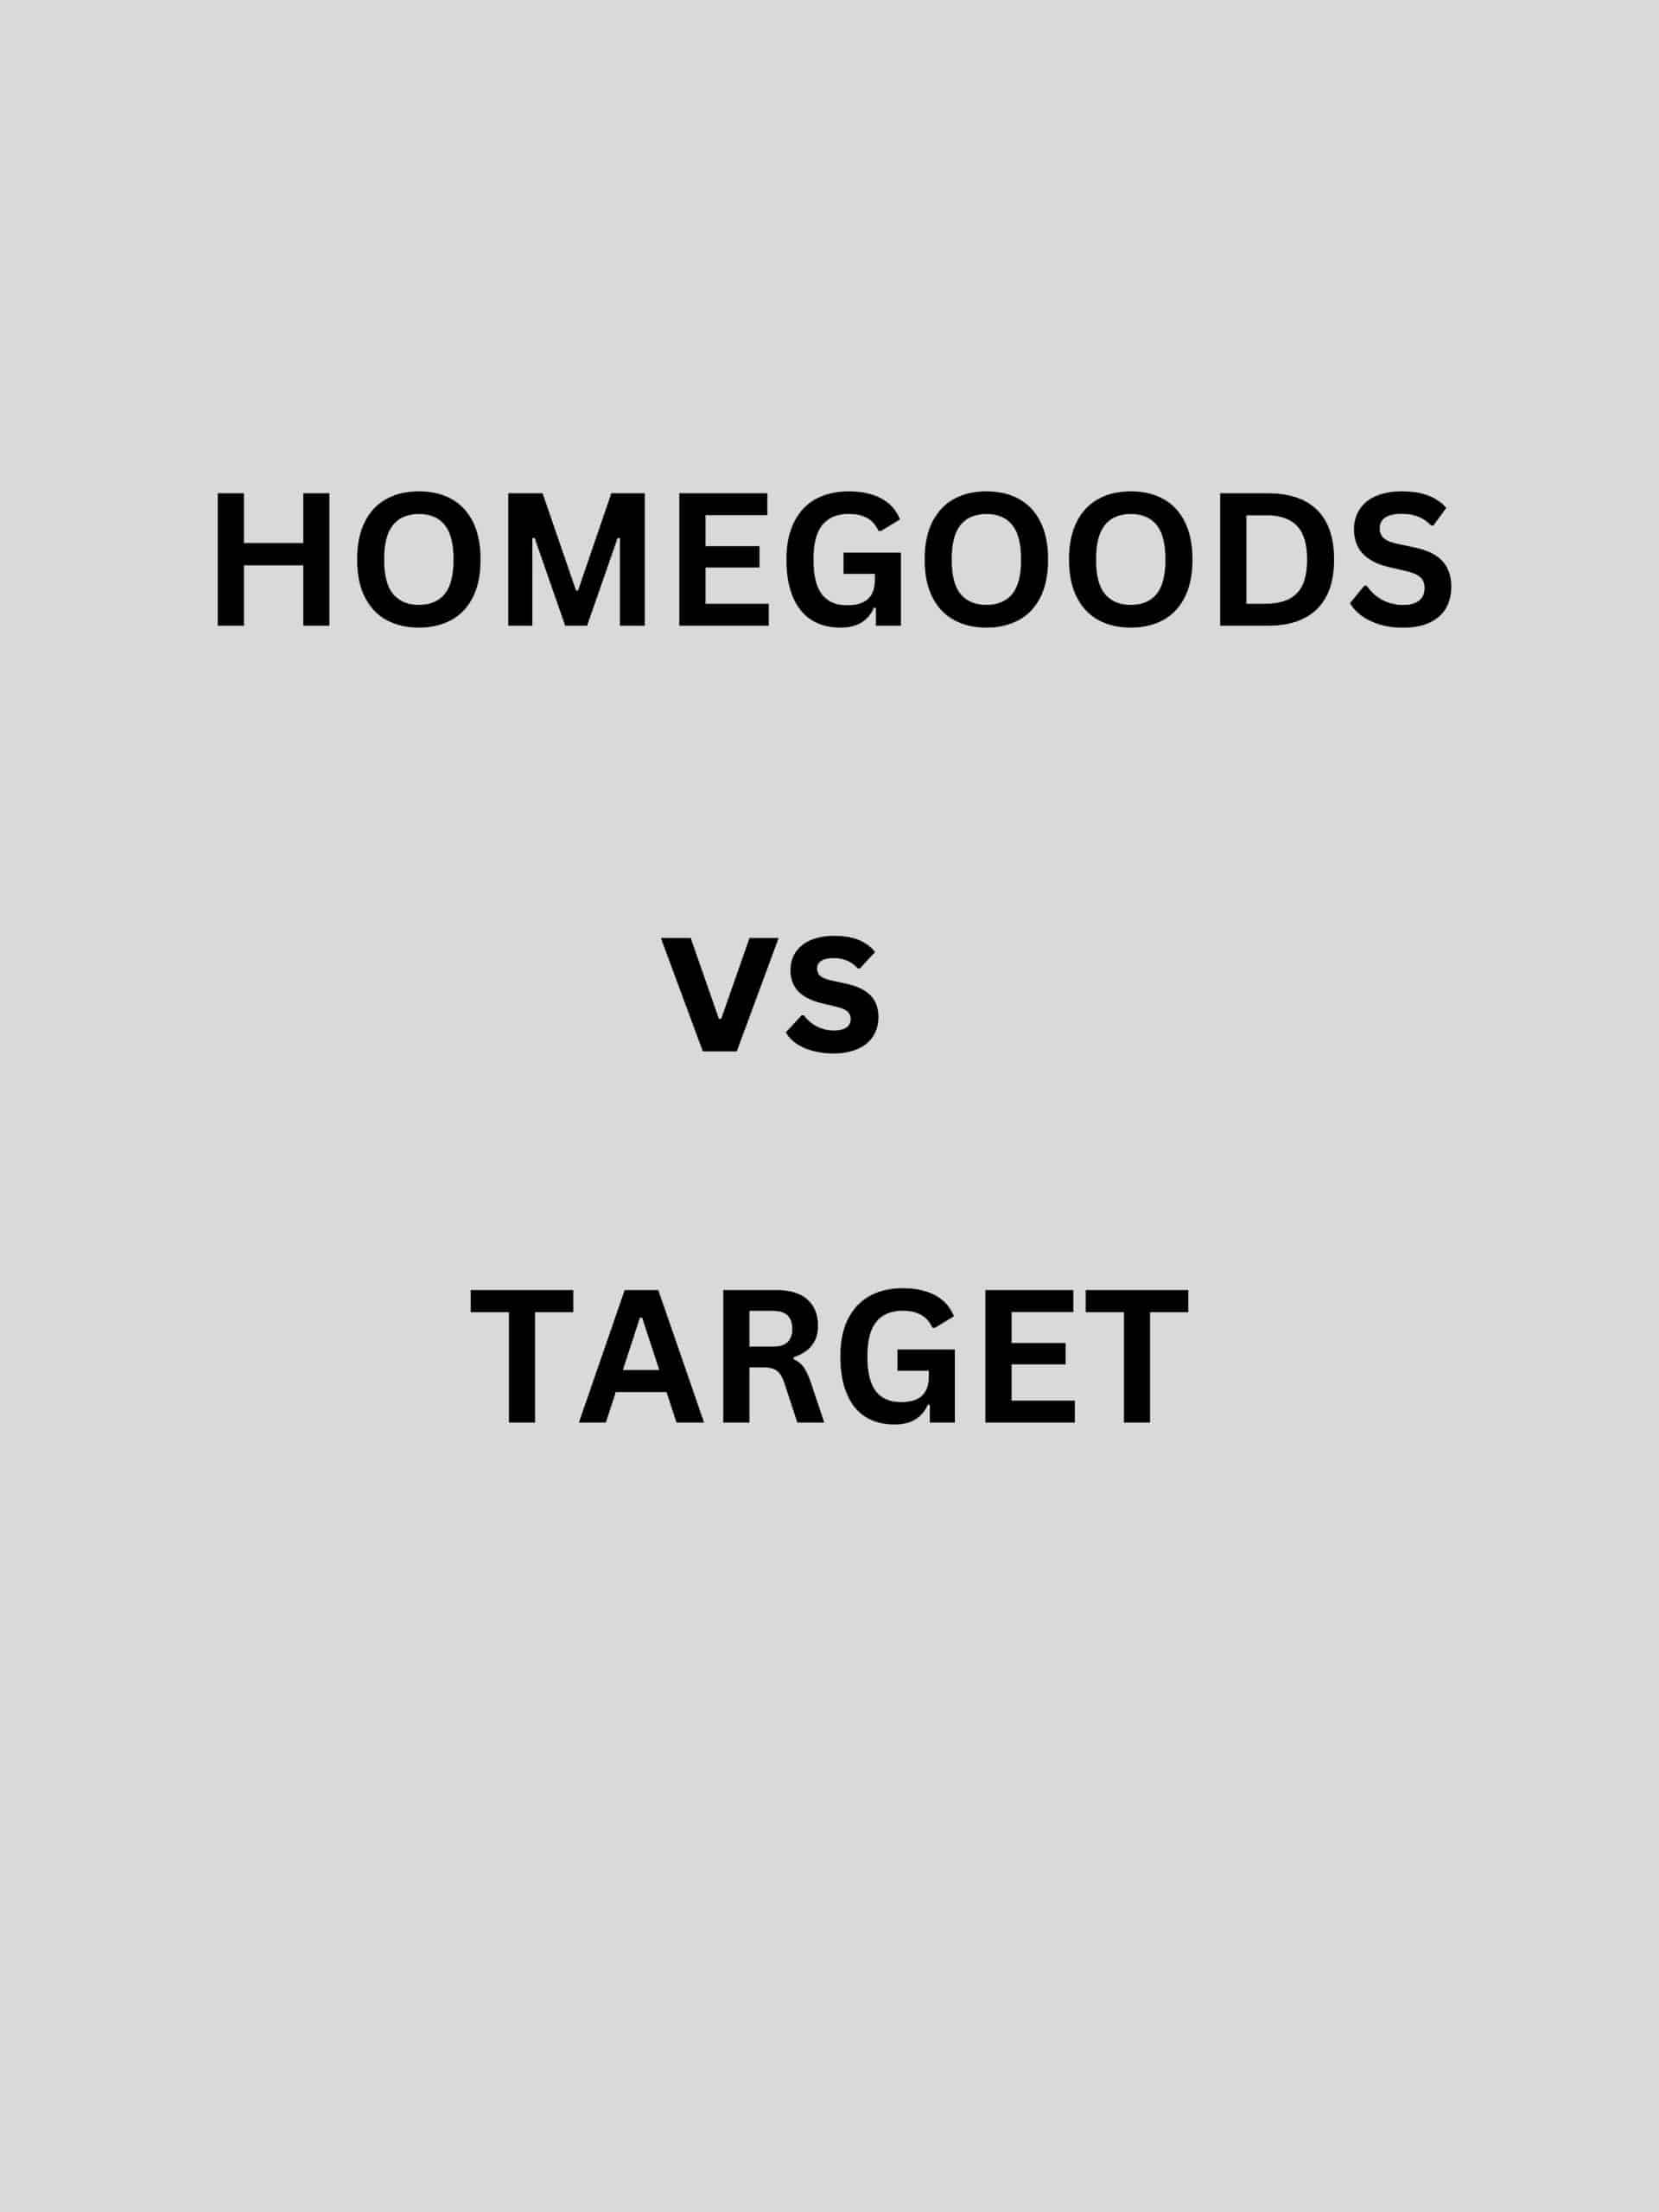 is homegoods cheaper than target